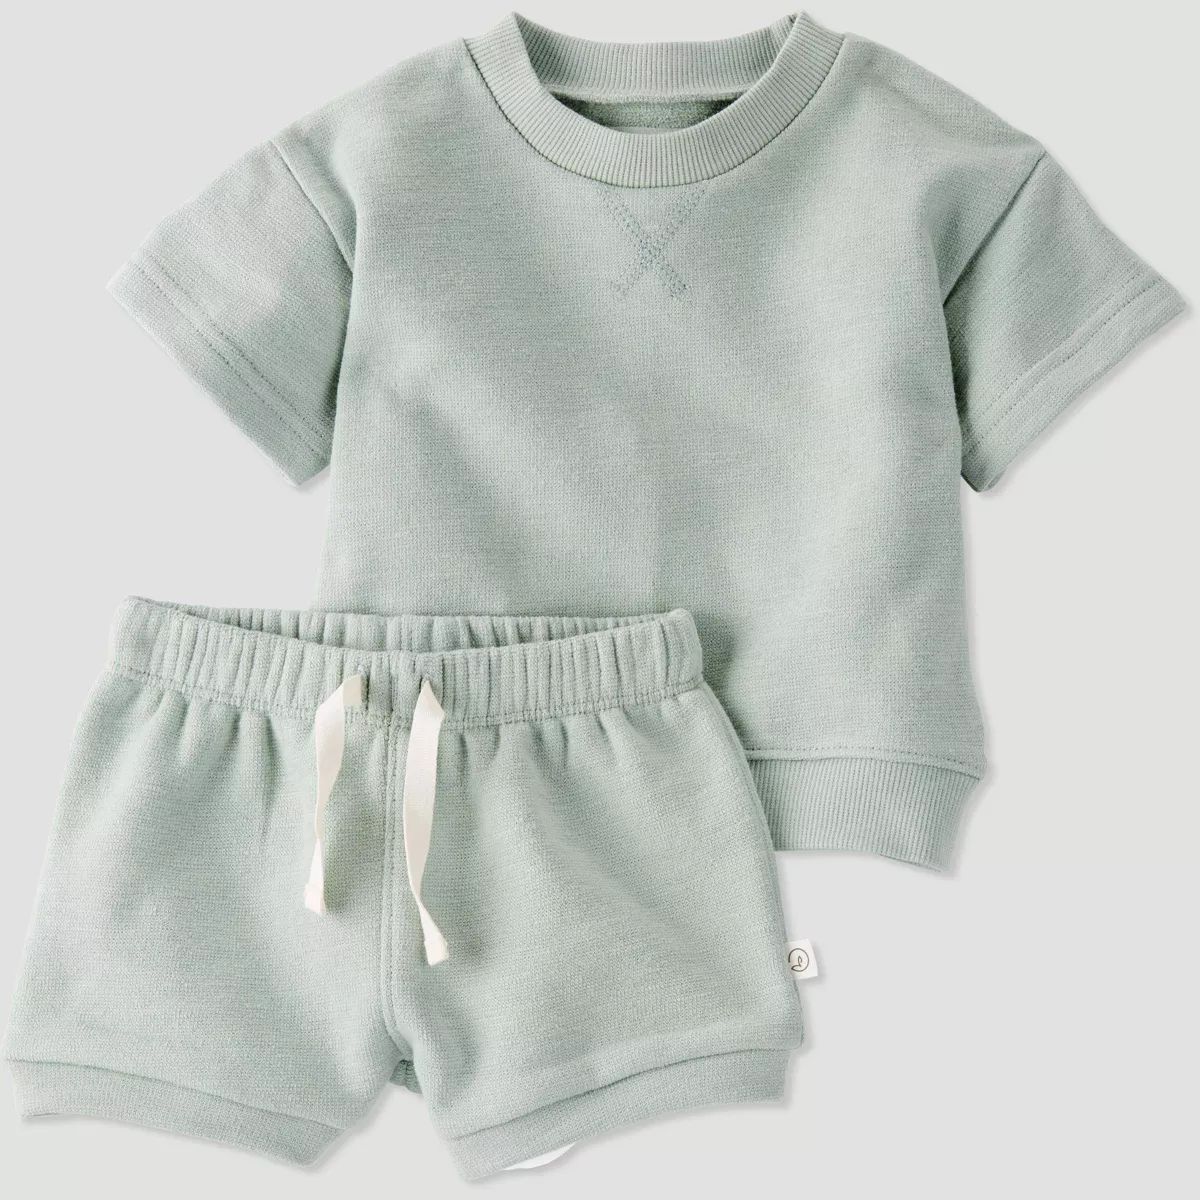 Little Planet by Carter's Organic Baby 2pc Shorts Set - Green 12M | Target